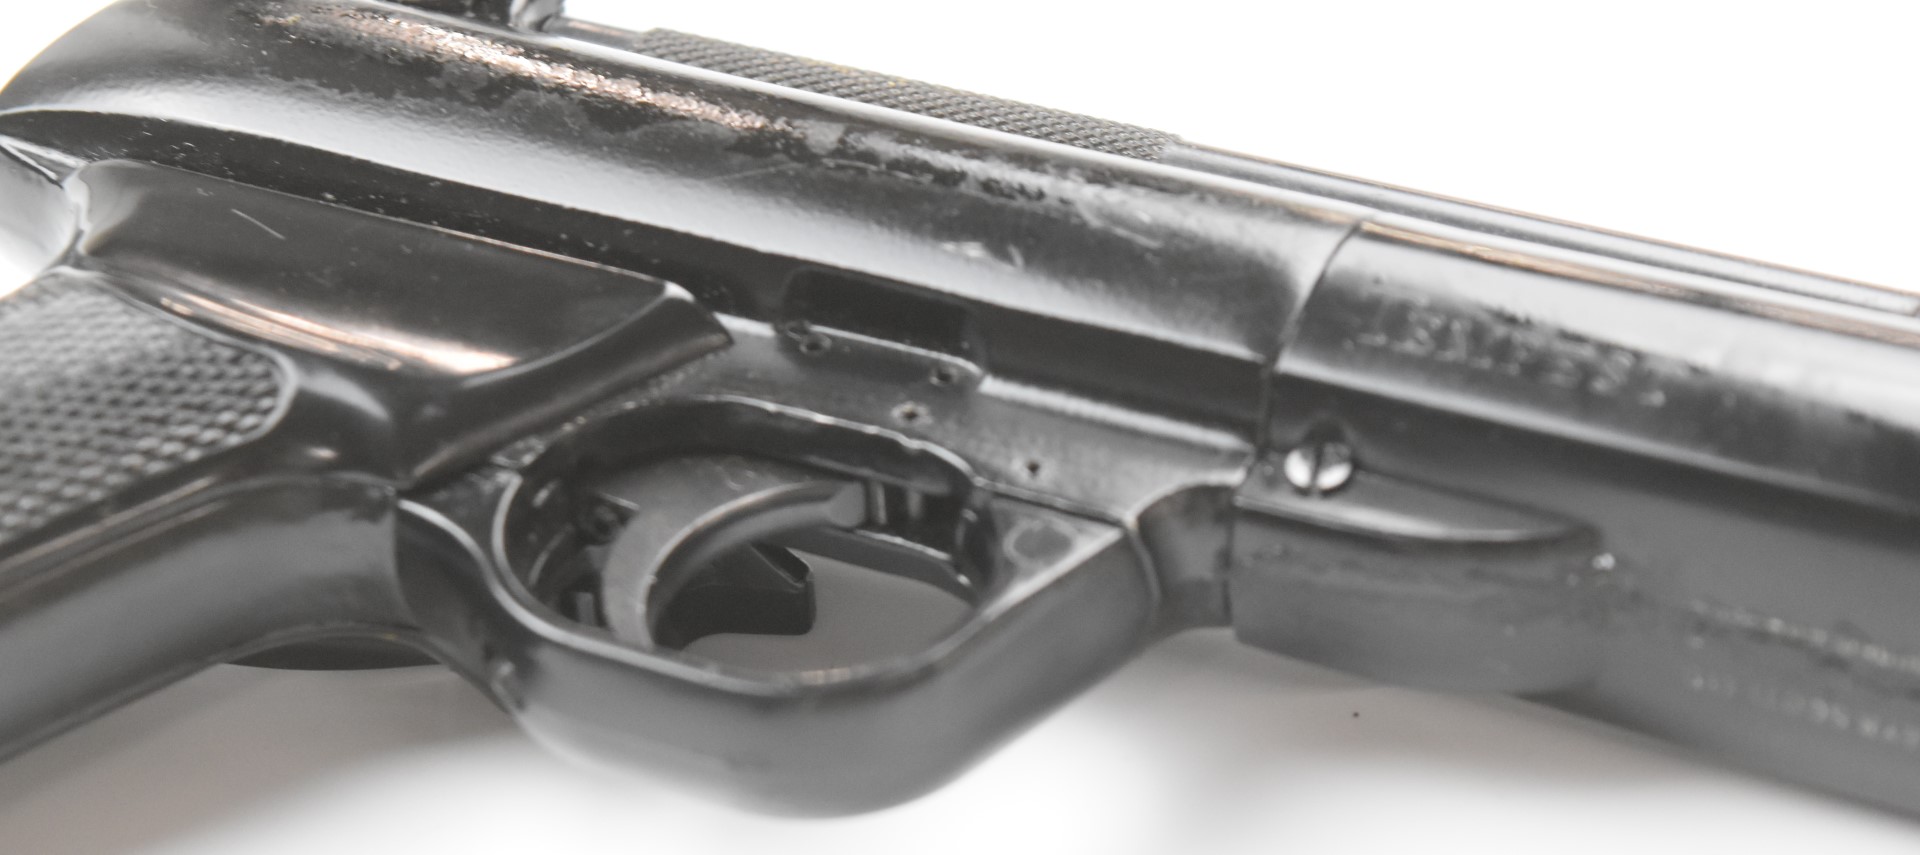 Webley Tempest .22 target air pistol with shaped and chequered grip and adjustable sights, NVSN, - Image 7 of 10